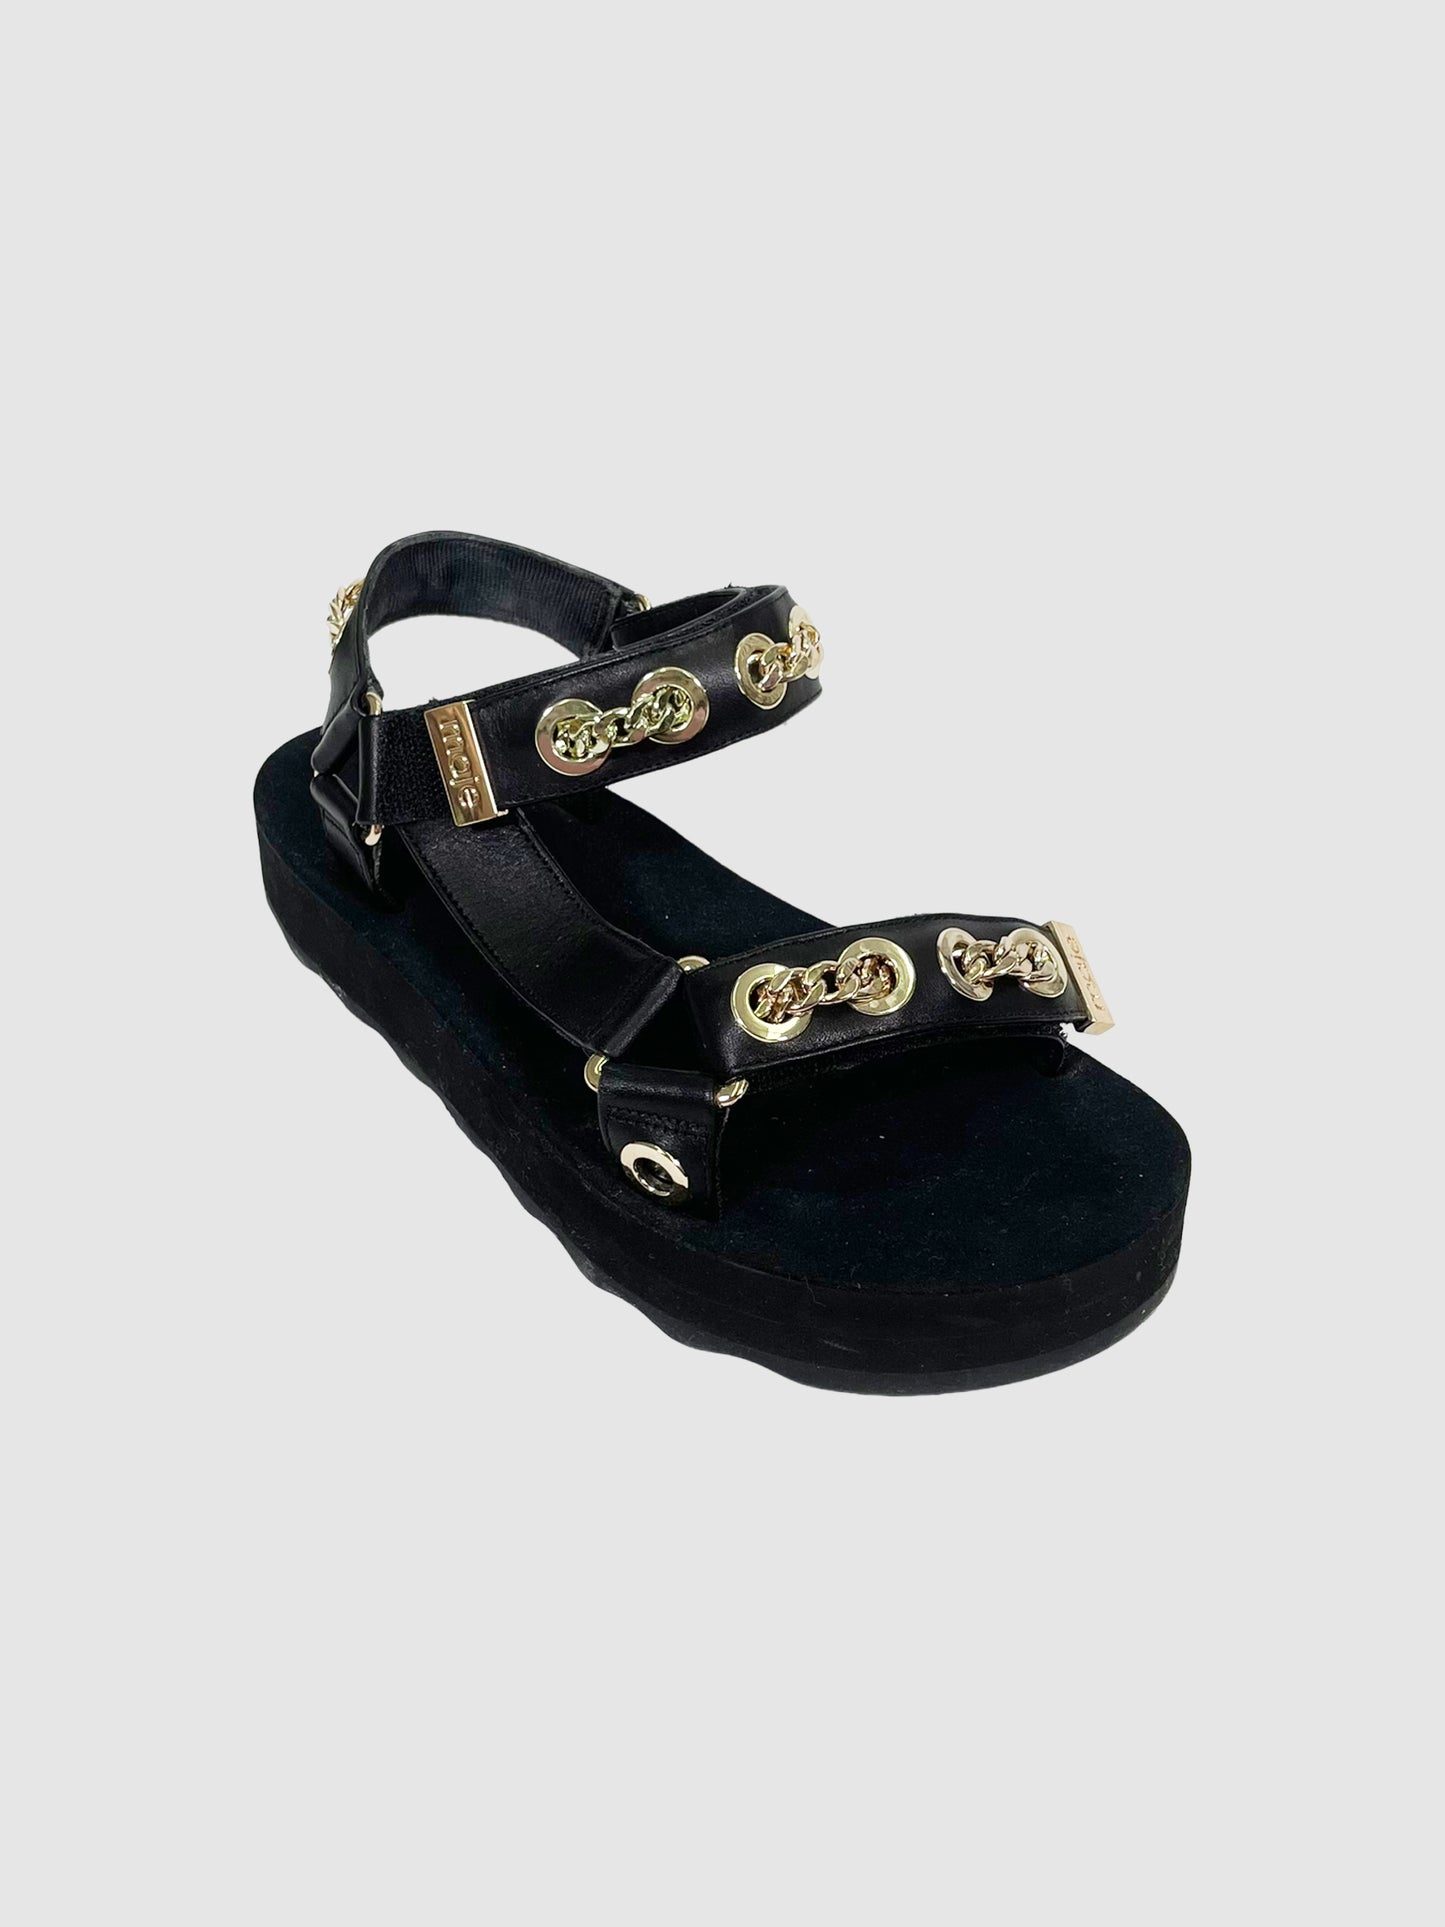 Maje Leather Chain Accents Sandals - Size 38